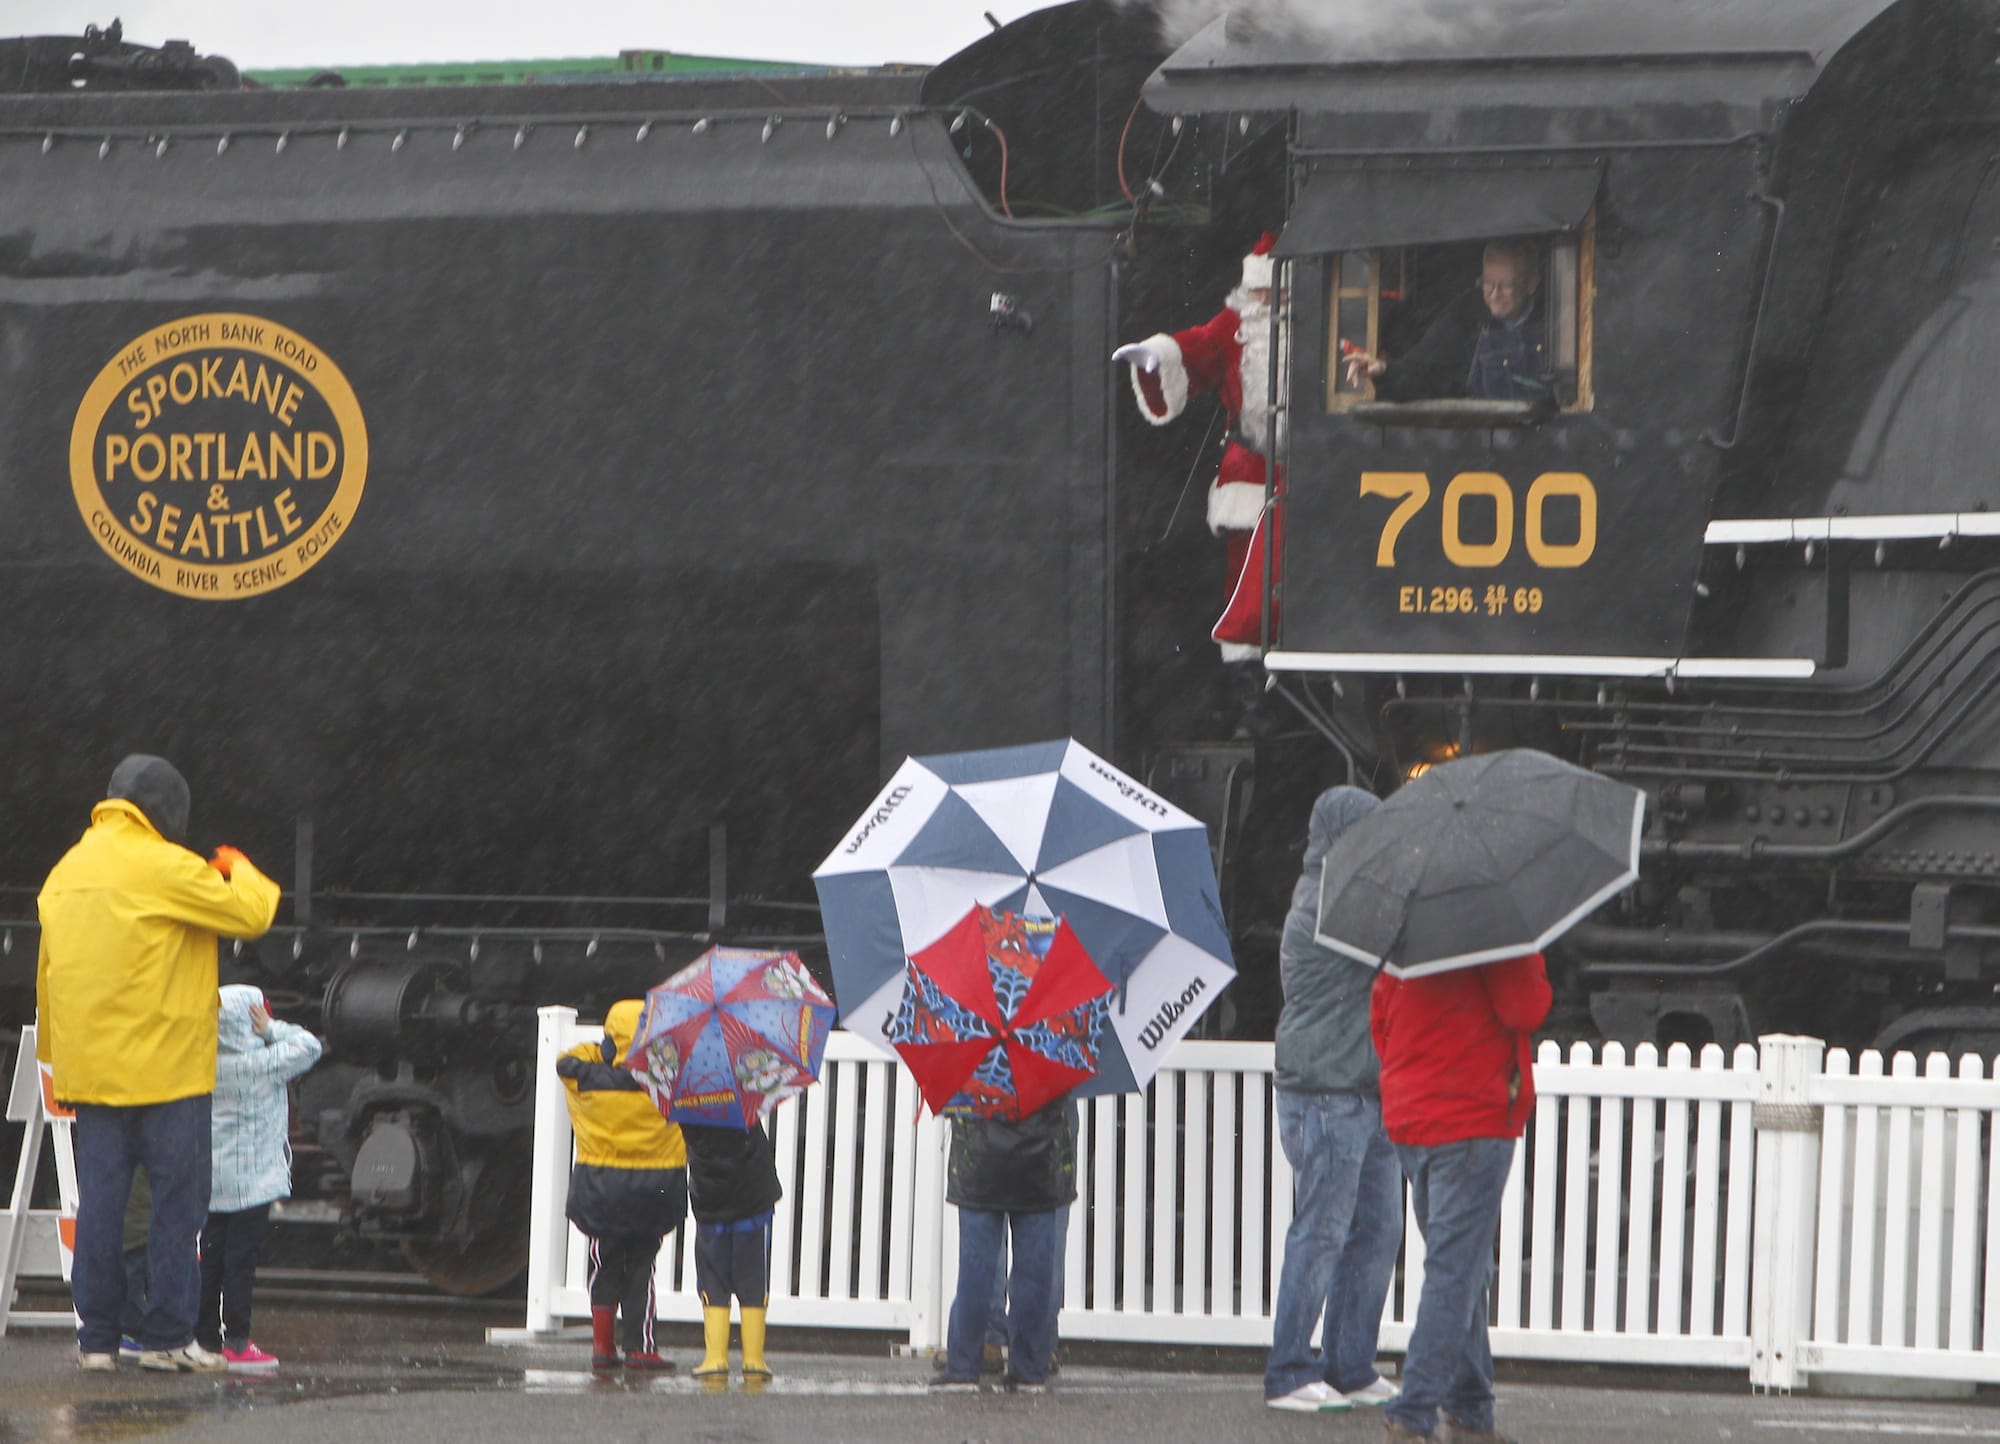 Kids and adults flock to Amtrak in Vancouver to catch a glimpse of Santa himself.